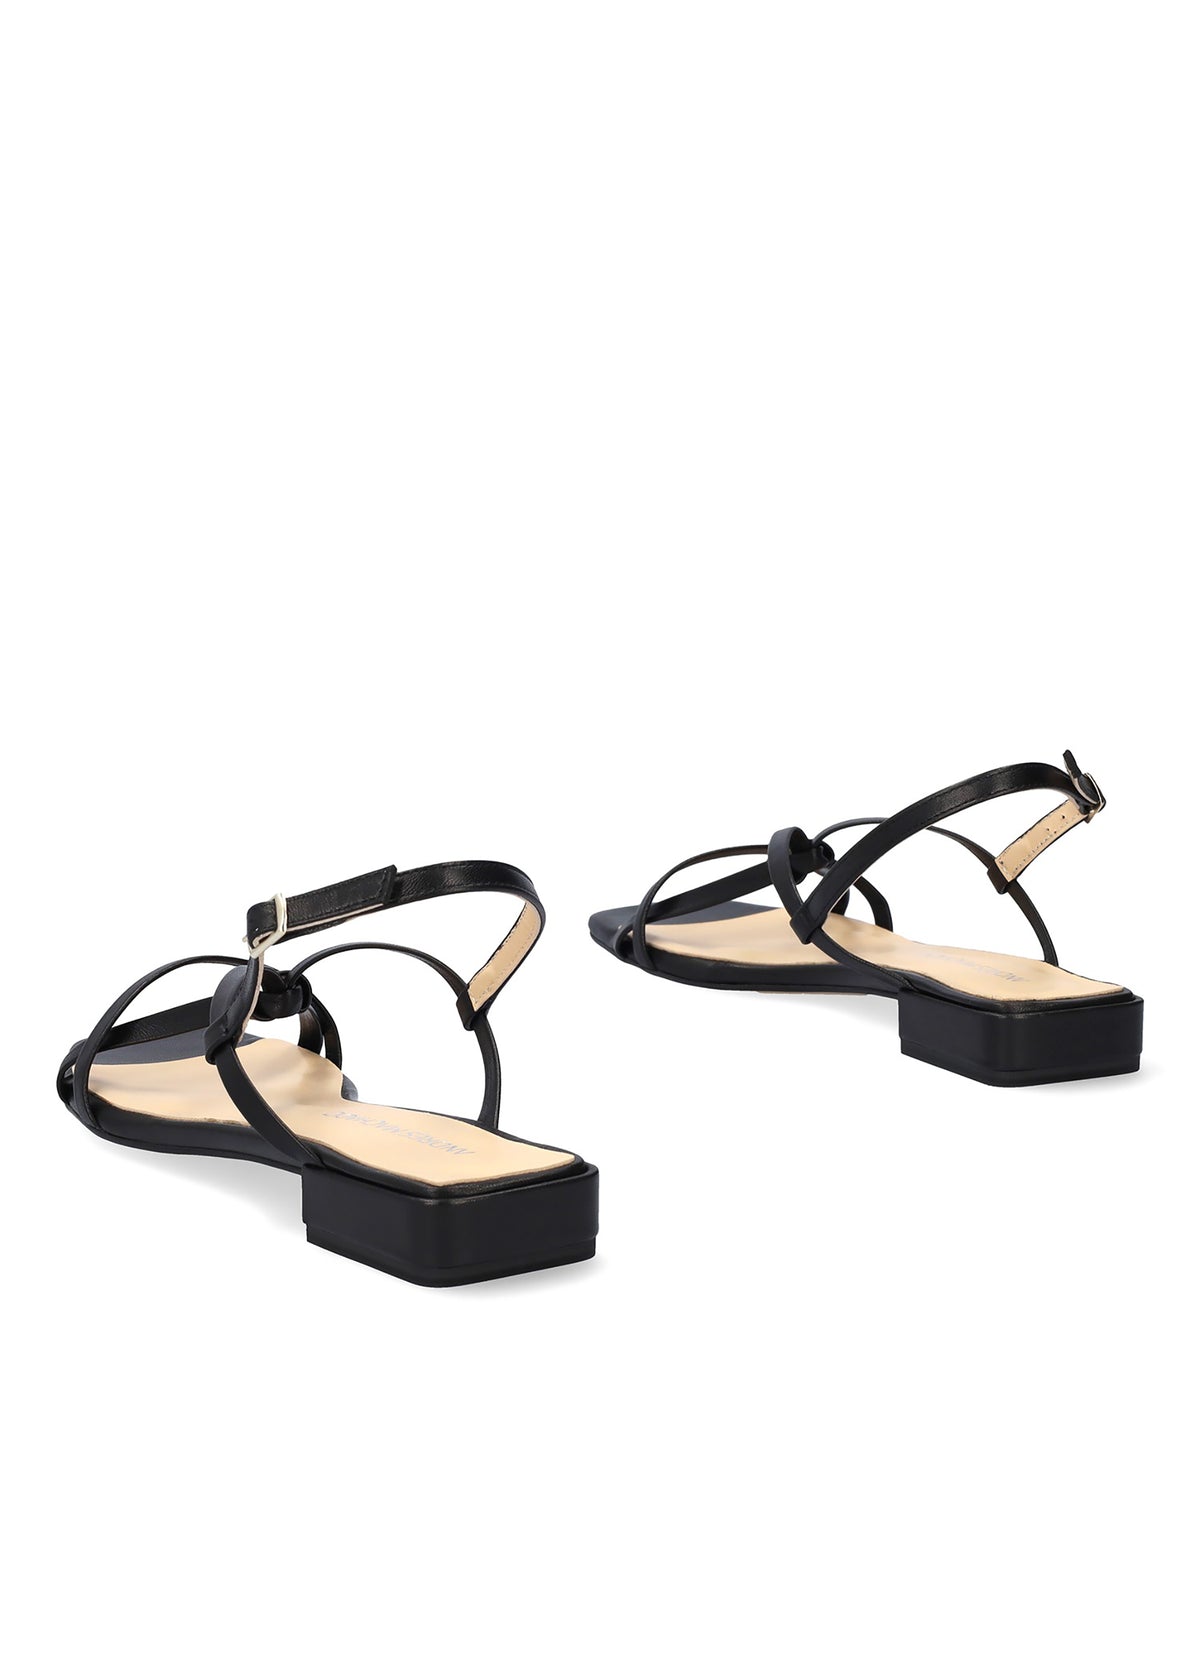 Sandals with thin strings - Vera, black leather